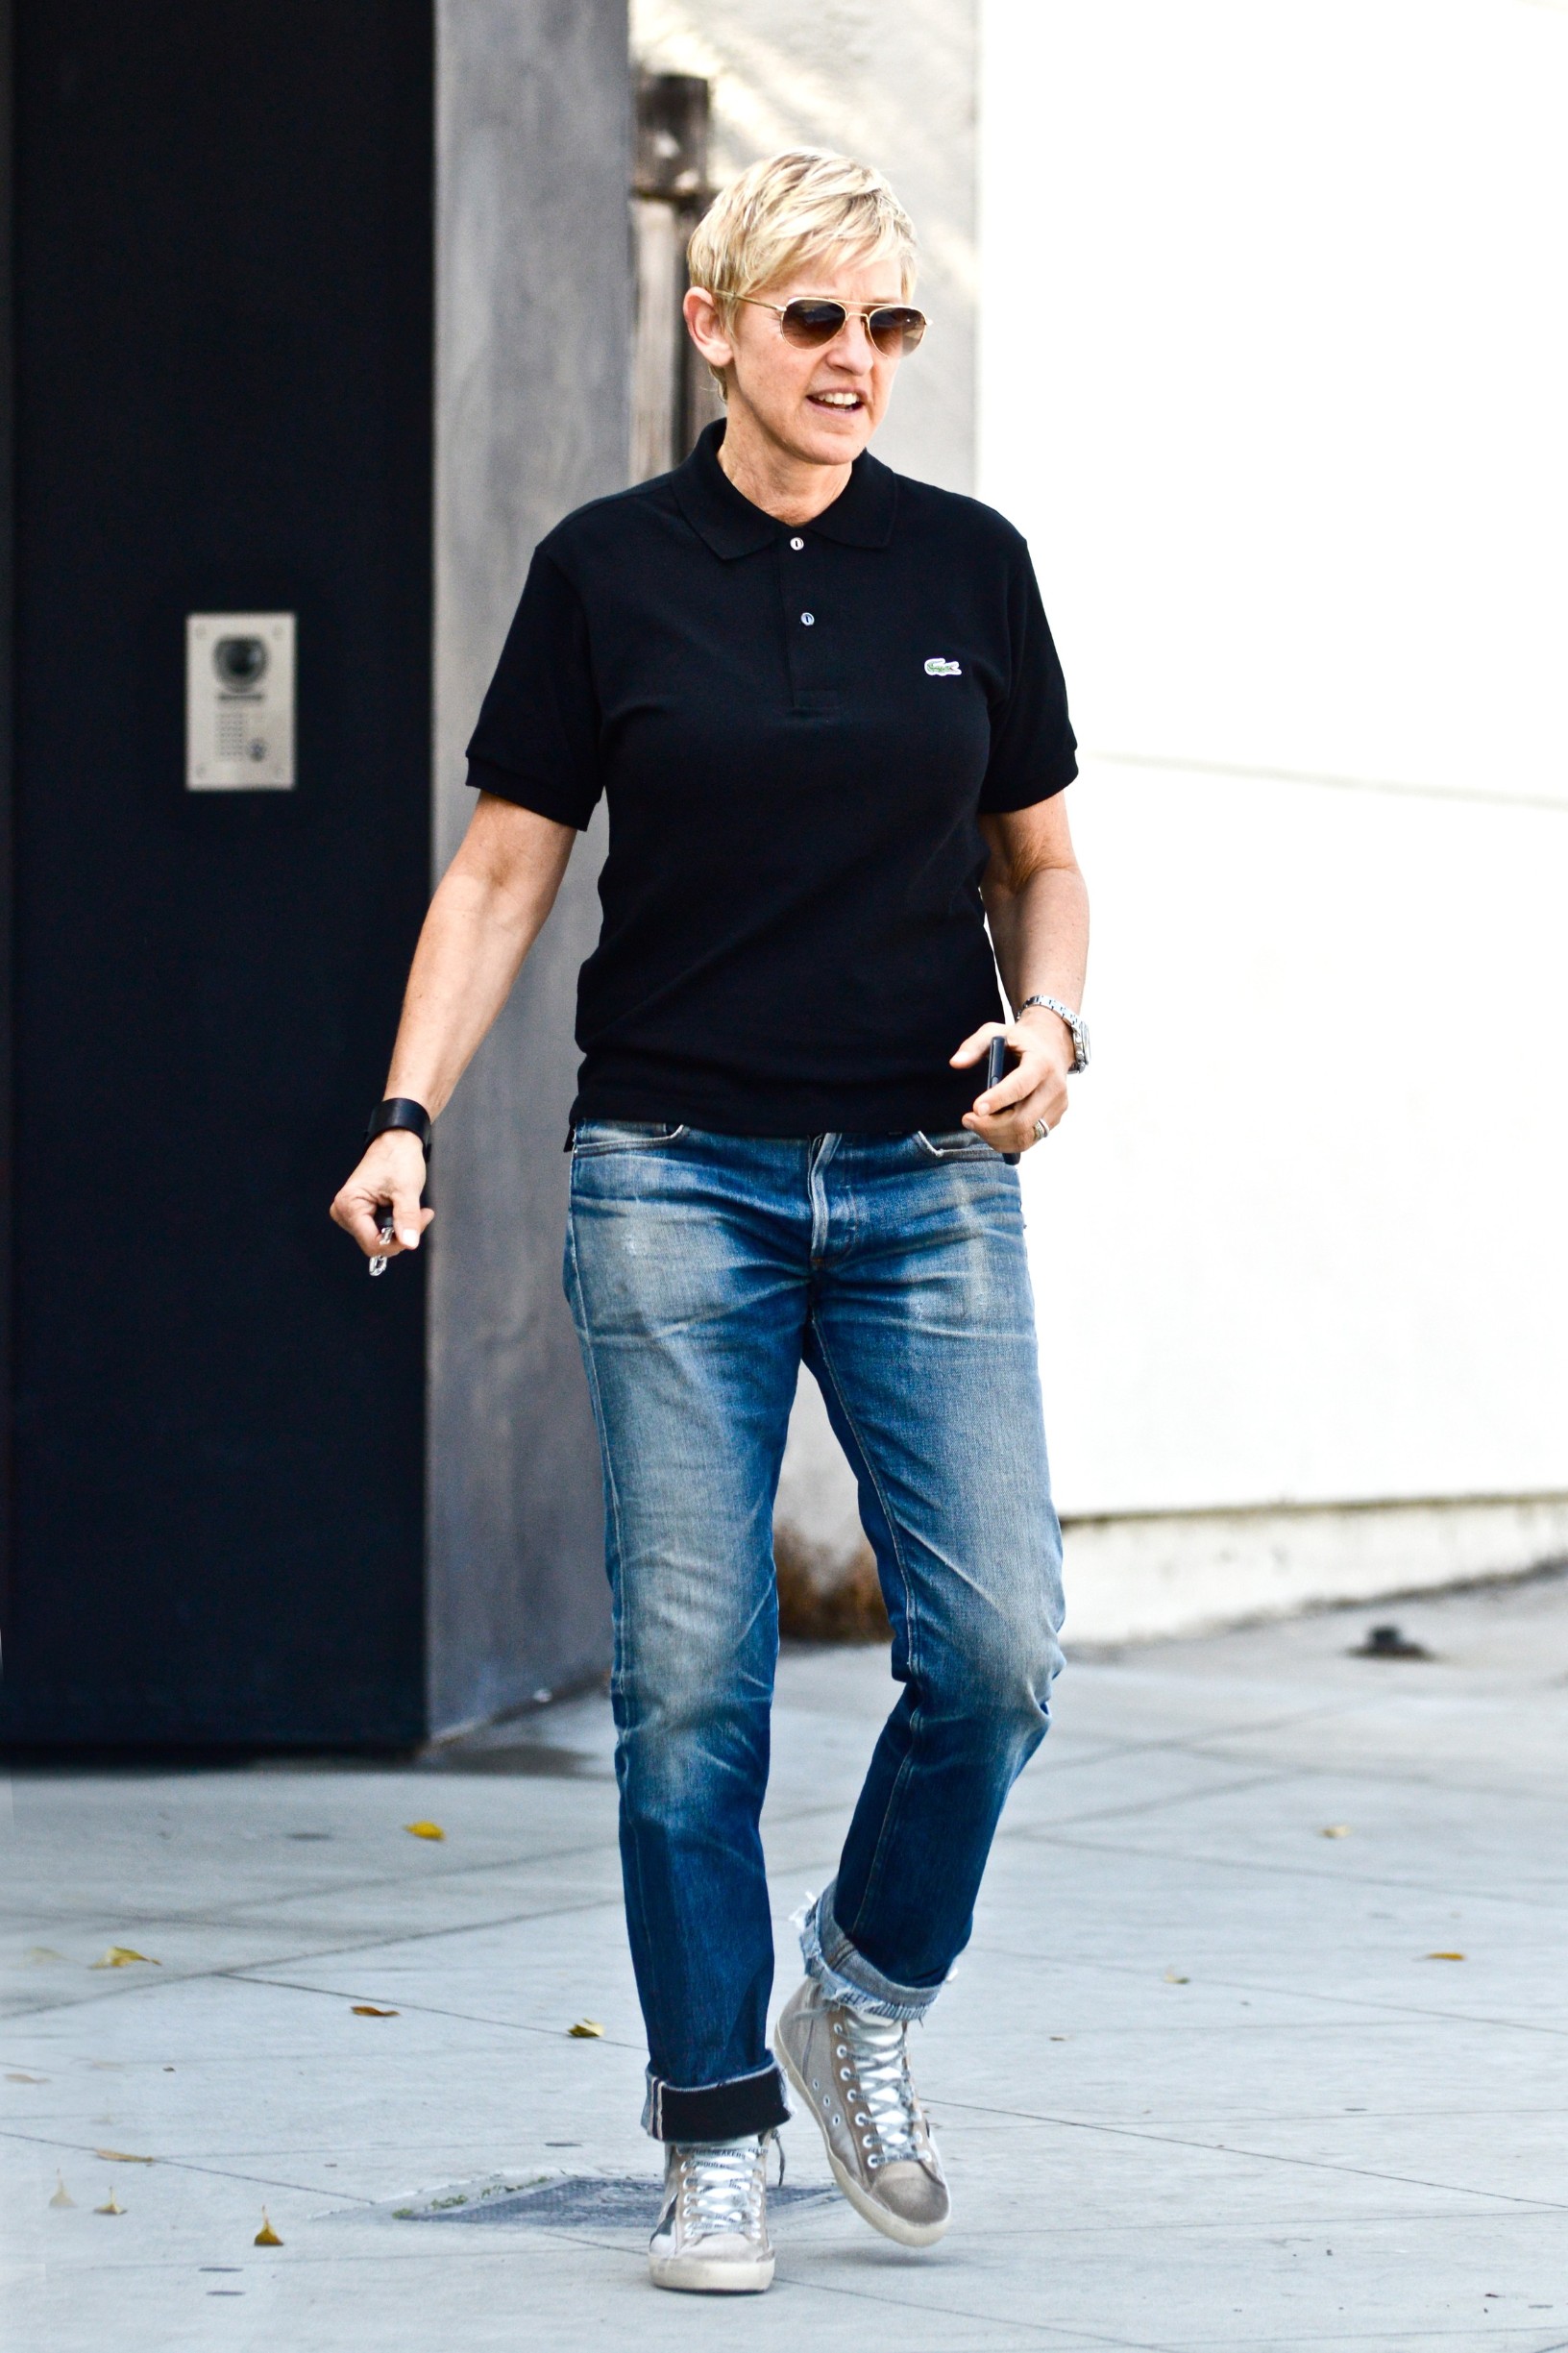 *EXCLUSIVE* West Hollywood, CA - TV host and comedian Ellen DeGeneres and wife Portia de Rossi as all smiles as they go furniture shopping at High End Store in West Hollywood.
          October 25,  2013,Image: 175320876, License: Rights-managed, Restrictions: NO Brazil,NO Brazil, Model Release: no, Credit line: AKM Images / Backgrid USA / Profimedia